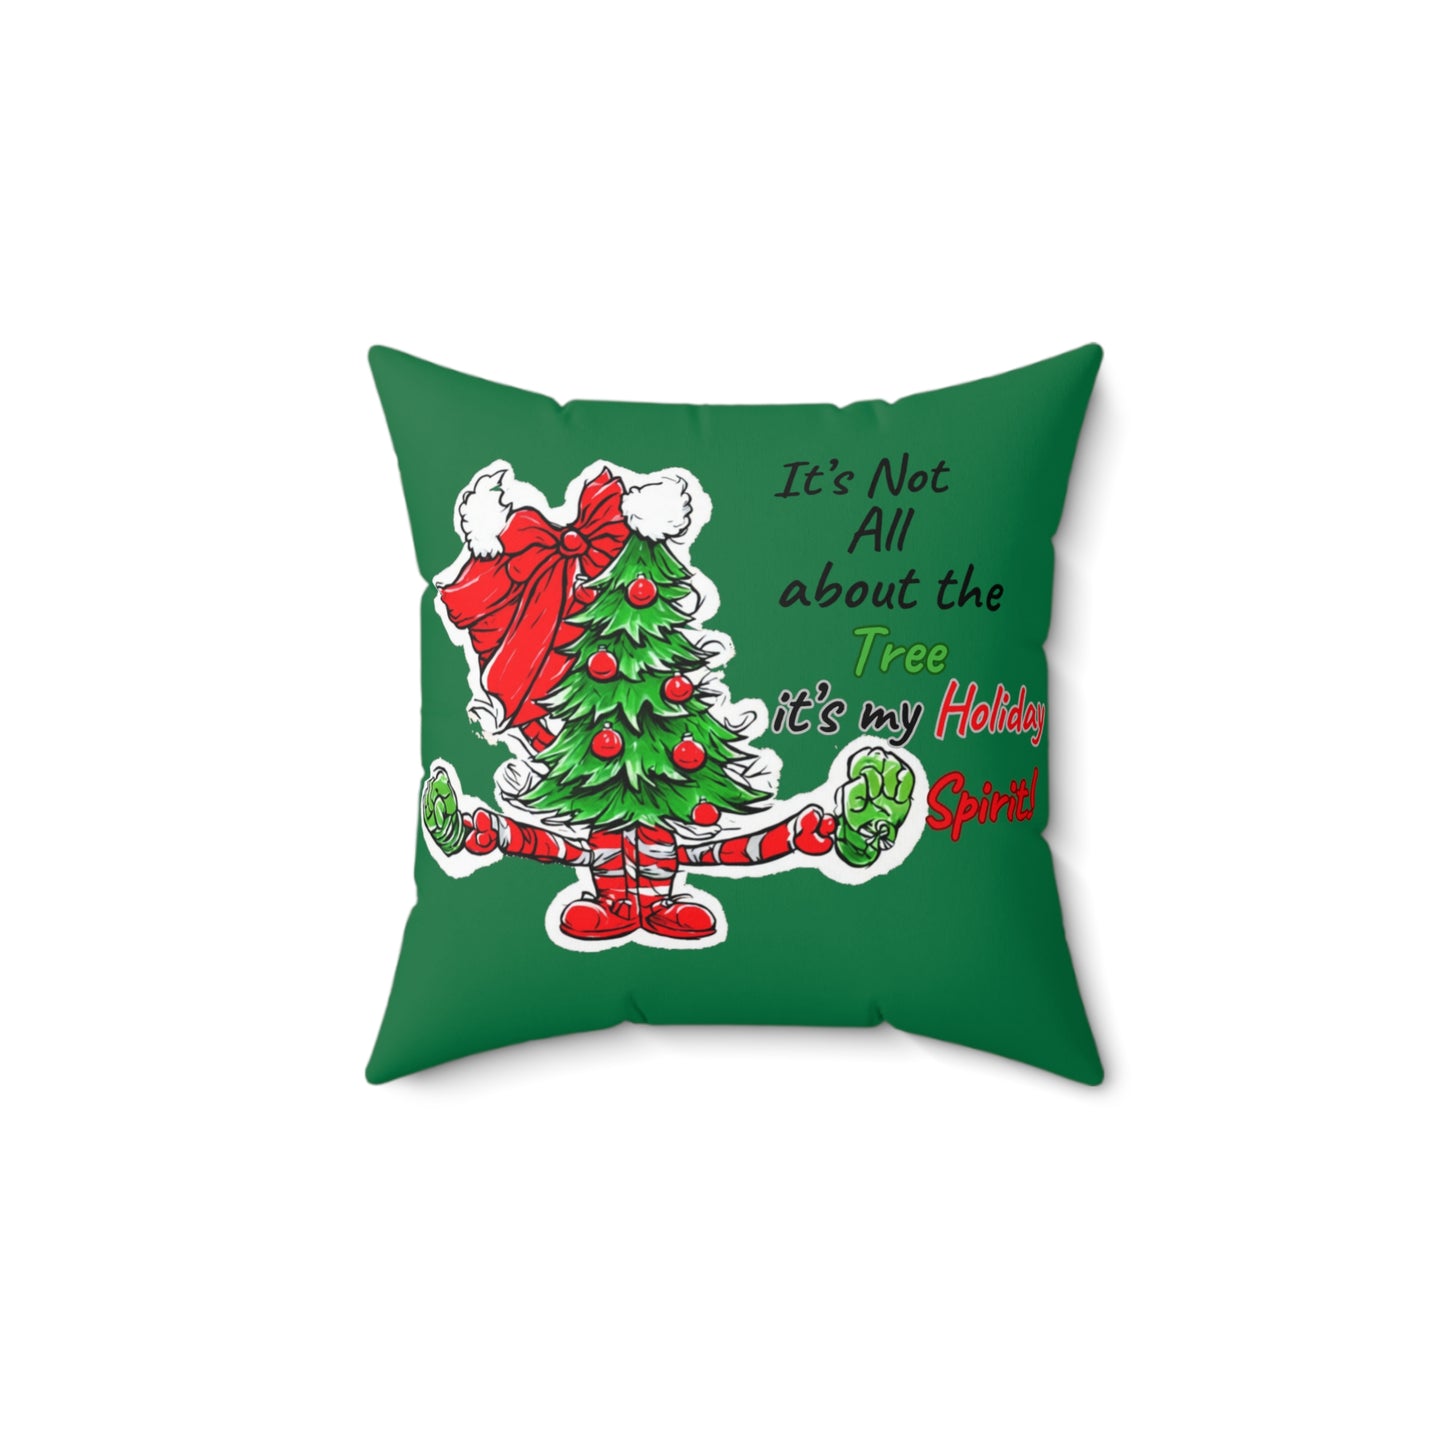 Its Not All About the Tree | Square Pillow